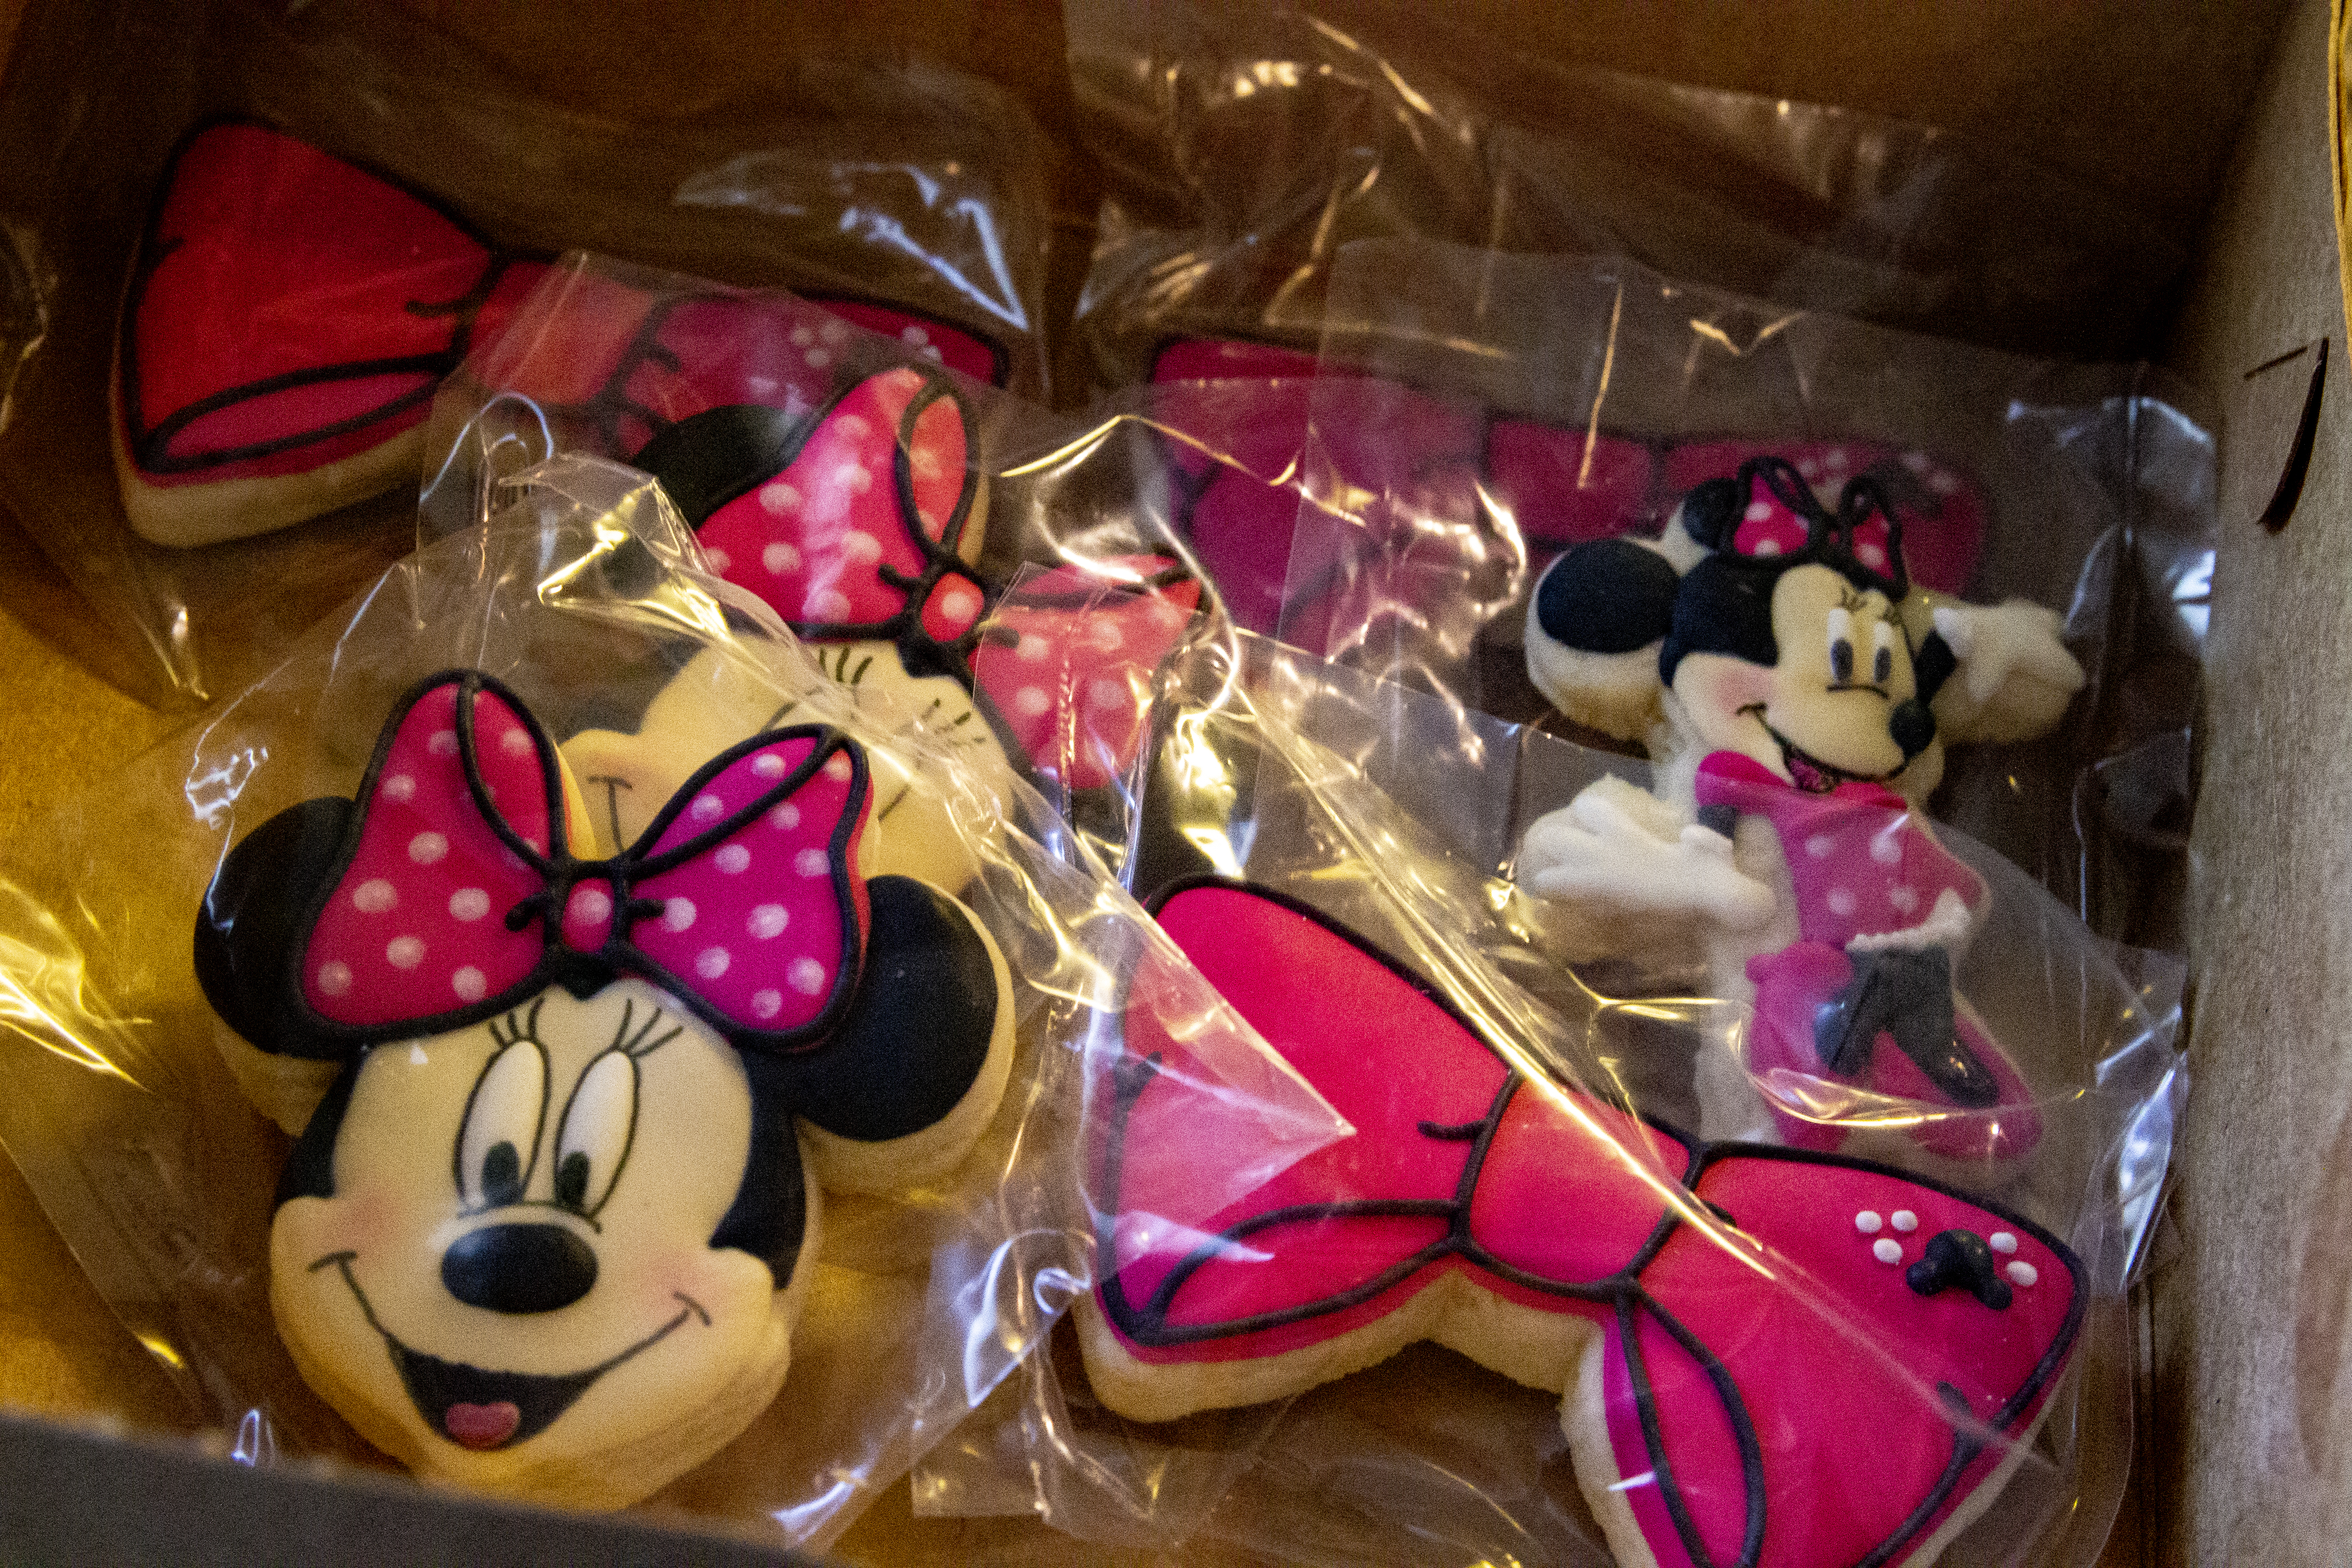 Minnie Mouse Cookie party favors for toddler birthday party